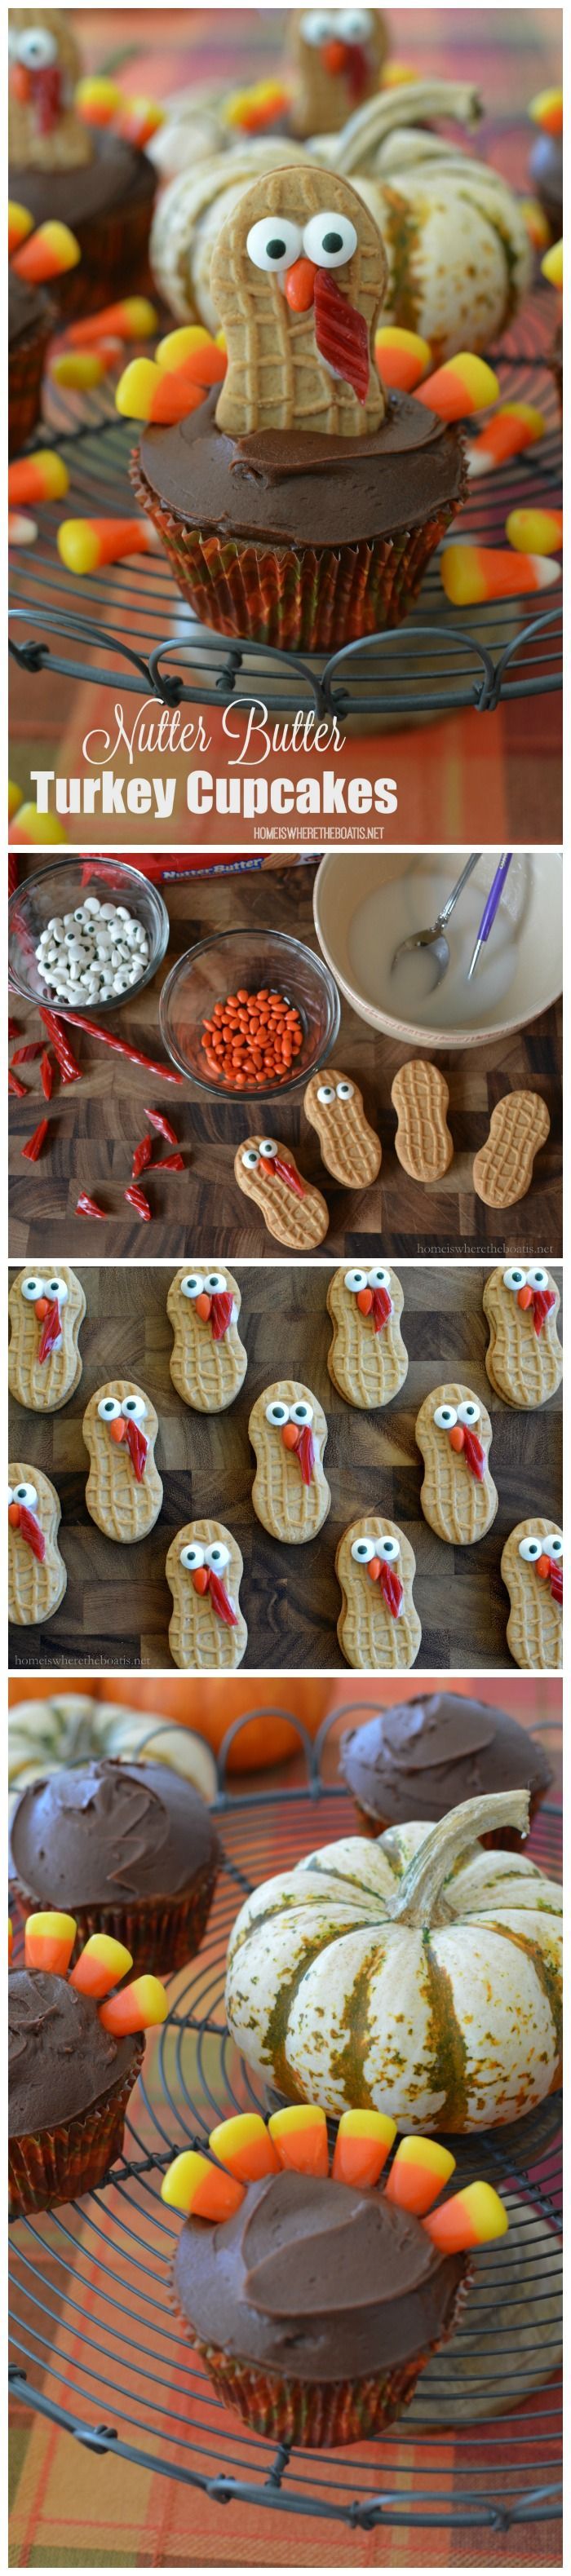 Nutter Butter Turkey Cupcakes, as fun to make as they are to eat…